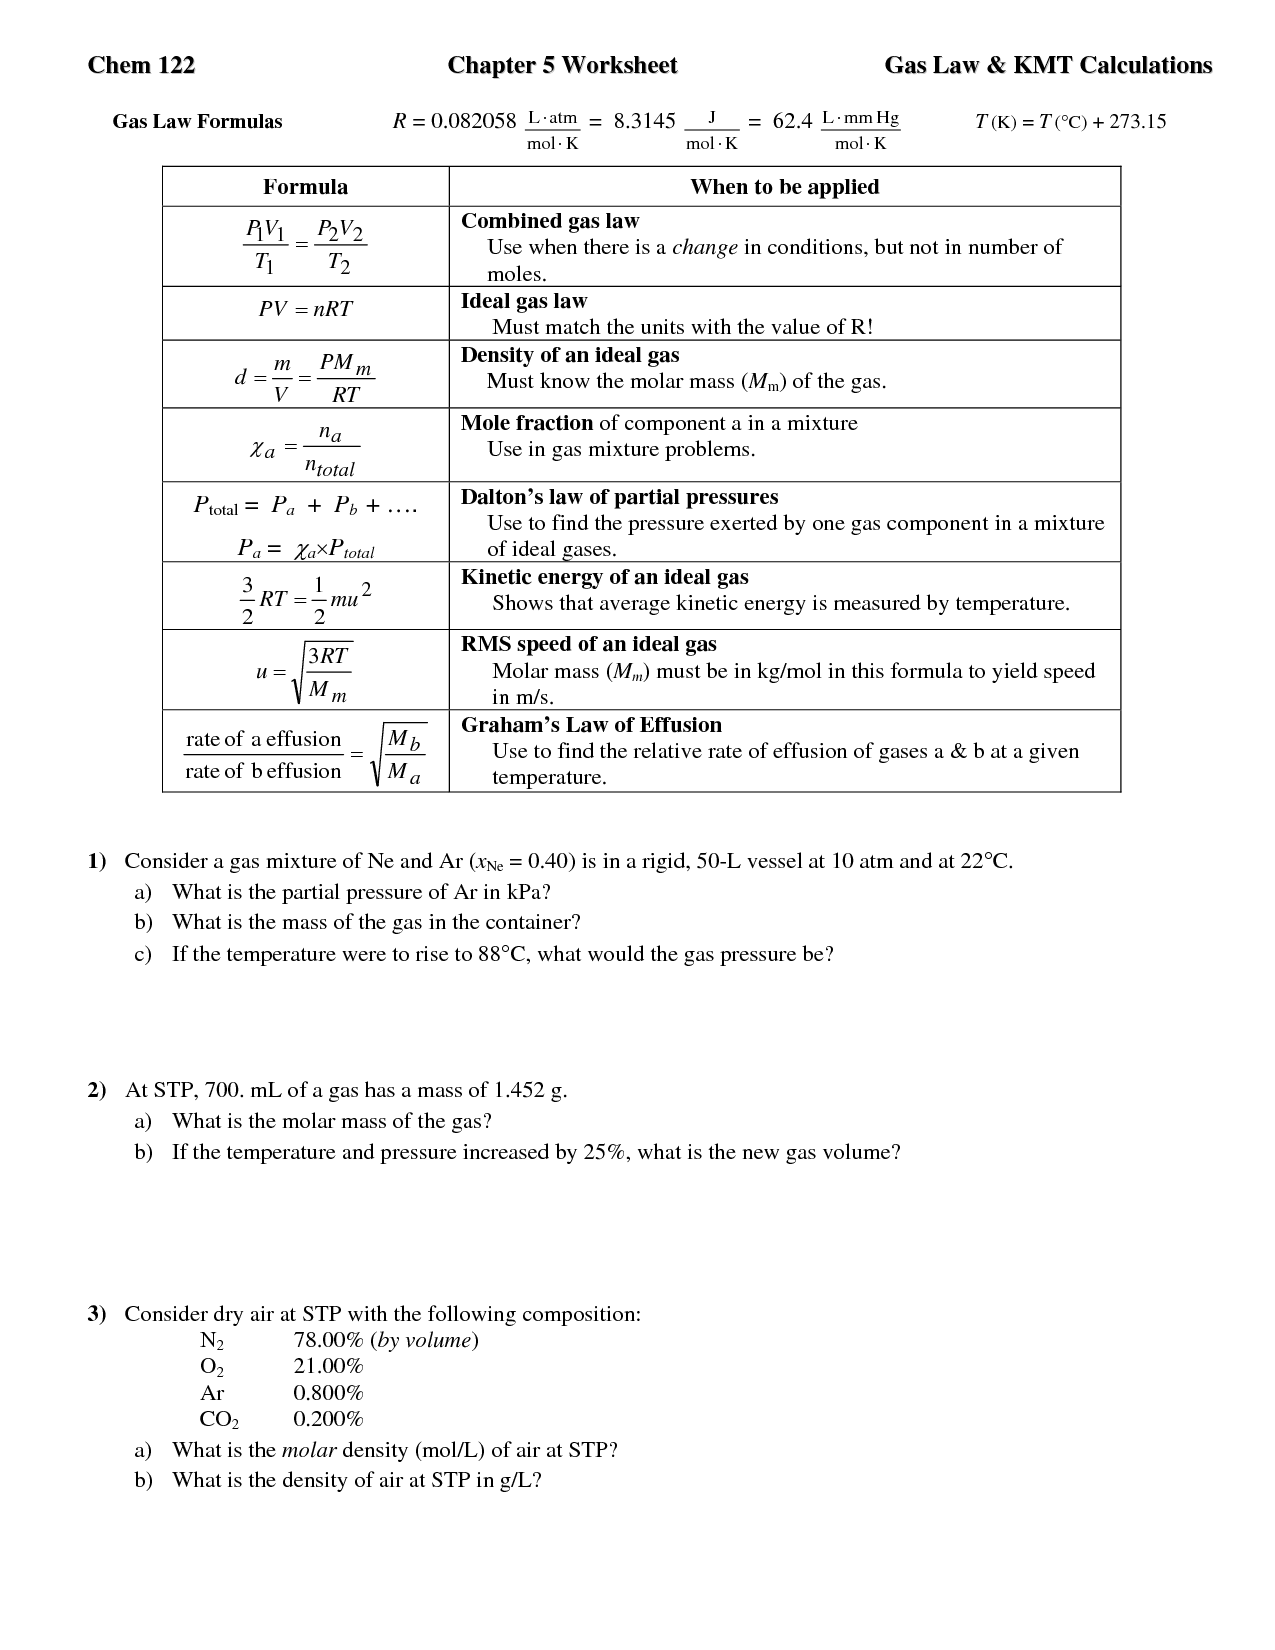 15-best-images-of-ideal-gas-law-worksheet-ideal-gas-law-worksheet-answers-ideal-gas-law